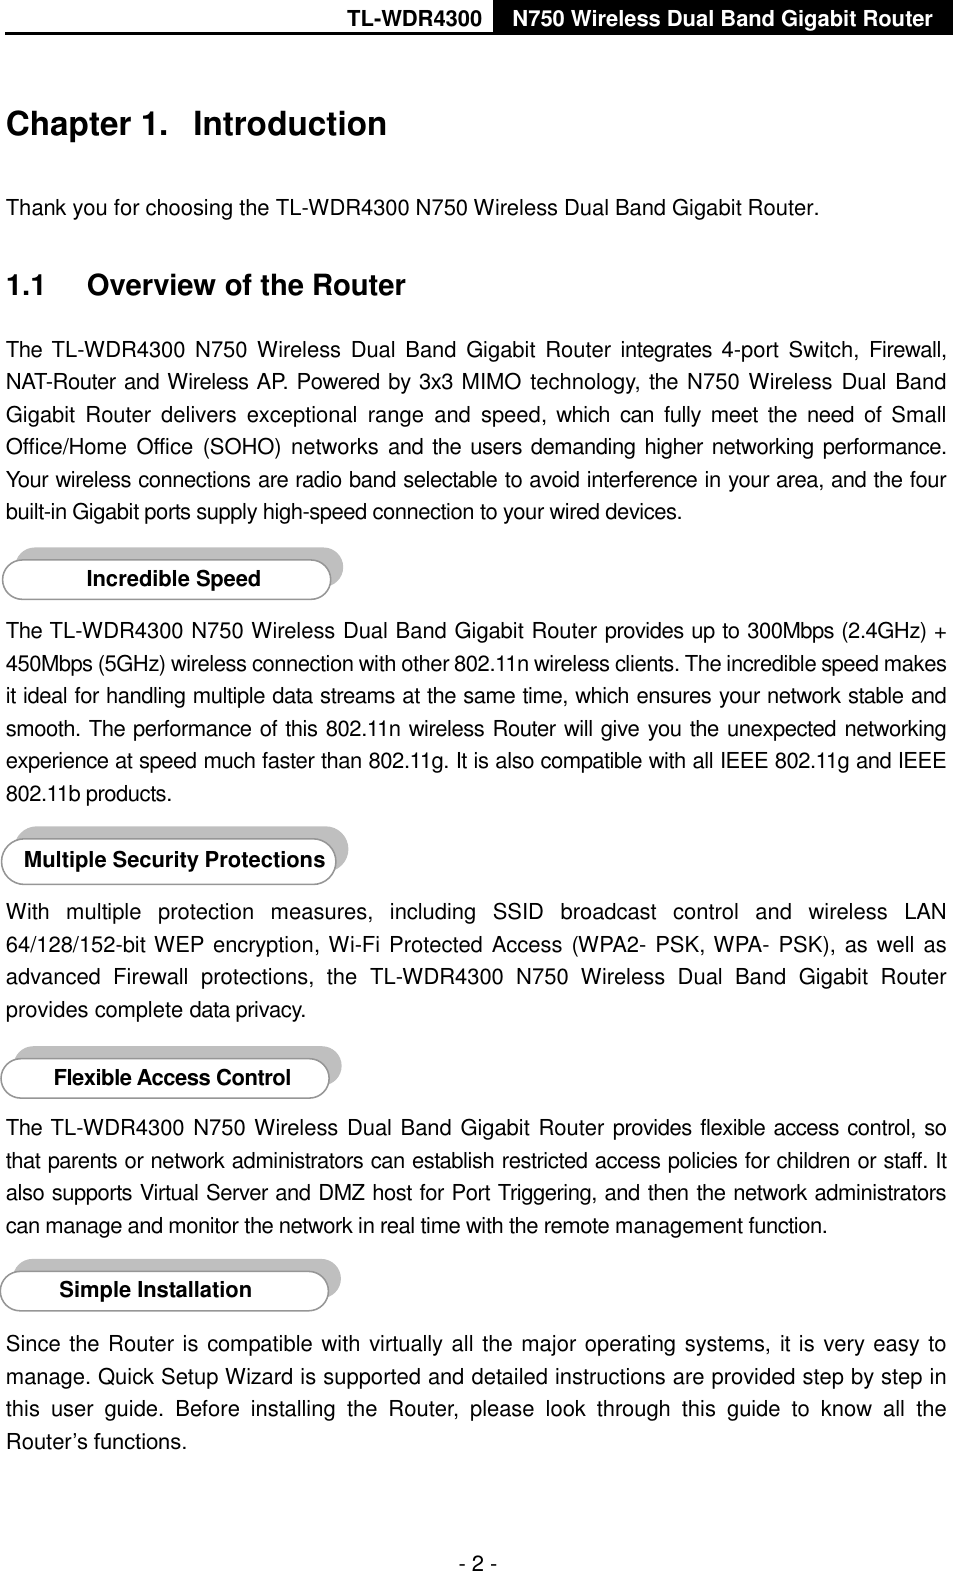 TL-WDR4300 N750 Wireless Dual Band Gigabit Router  - 2 - Chapter 1.  Introduction Thank you for choosing the TL-WDR4300 N750 Wireless Dual Band Gigabit Router. 1.1  Overview of the Router The TL-WDR4300 N750  Wireless  Dual  Band  Gigabit Router  integrates 4-port  Switch,  Firewall, NAT-Router and Wireless AP. Powered by 3x3 MIMO technology, the N750 Wireless Dual Band Gigabit  Router  delivers  exceptional  range  and  speed, which  can  fully  meet  the  need  of Small Office/Home  Office  (SOHO) networks and the users demanding higher networking performance. Your wireless connections are radio band selectable to avoid interference in your area, and the four built-in Gigabit ports supply high-speed connection to your wired devices.    The TL-WDR4300 N750 Wireless Dual Band Gigabit Router provides up to 300Mbps (2.4GHz) + 450Mbps (5GHz) wireless connection with other 802.11n wireless clients. The incredible speed makes it ideal for handling multiple data streams at the same time, which ensures your network stable and smooth. The performance of this 802.11n wireless Router will give you the unexpected networking experience at speed much faster than 802.11g. It is also compatible with all IEEE 802.11g and IEEE 802.11b products.  With  multiple  protection  measures,  including  SSID  broadcast  control  and  wireless  LAN 64/128/152-bit WEP encryption, Wi-Fi Protected Access (WPA2- PSK, WPA- PSK), as well as advanced  Firewall  protections,  the  TL-WDR4300  N750  Wireless  Dual  Band  Gigabit  Router provides complete data privacy.    The TL-WDR4300 N750 Wireless Dual Band Gigabit Router provides flexible access control, so that parents or network administrators can establish restricted access policies for children or staff. It also supports Virtual Server and DMZ host for Port Triggering, and then the network administrators can manage and monitor the network in real time with the remote management function.    Since the Router is compatible with virtually all the major operating systems,  it is very easy to manage. Quick Setup Wizard is supported and detailed instructions are provided step by step in this  user  guide.  Before  installing  the  Router,  please  look  through  this  guide  to  know  all  the Router’s functions. Simple Installation Flexible Access Control AccessontroInstallation Multiple Security Protections Incredible Speed AccessontroInstallation 